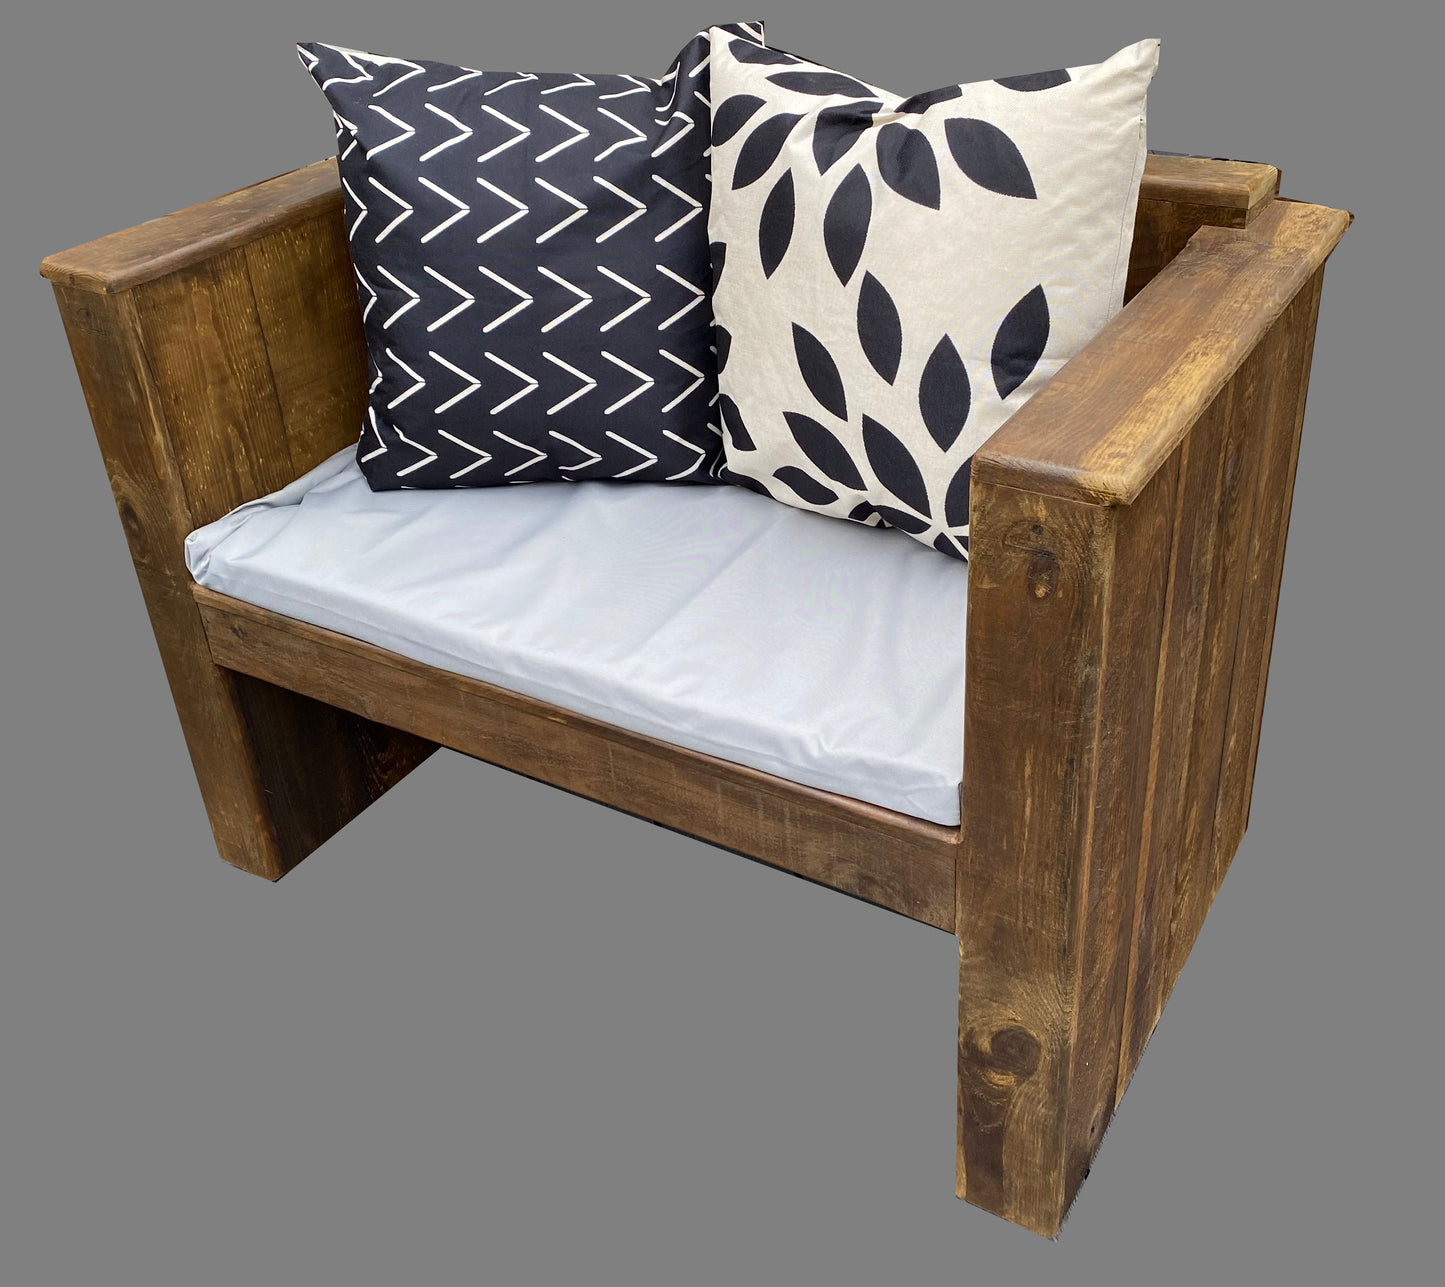 Sleeper style outdoor wooden sofa, made from distressed timber, treated for outdoor use